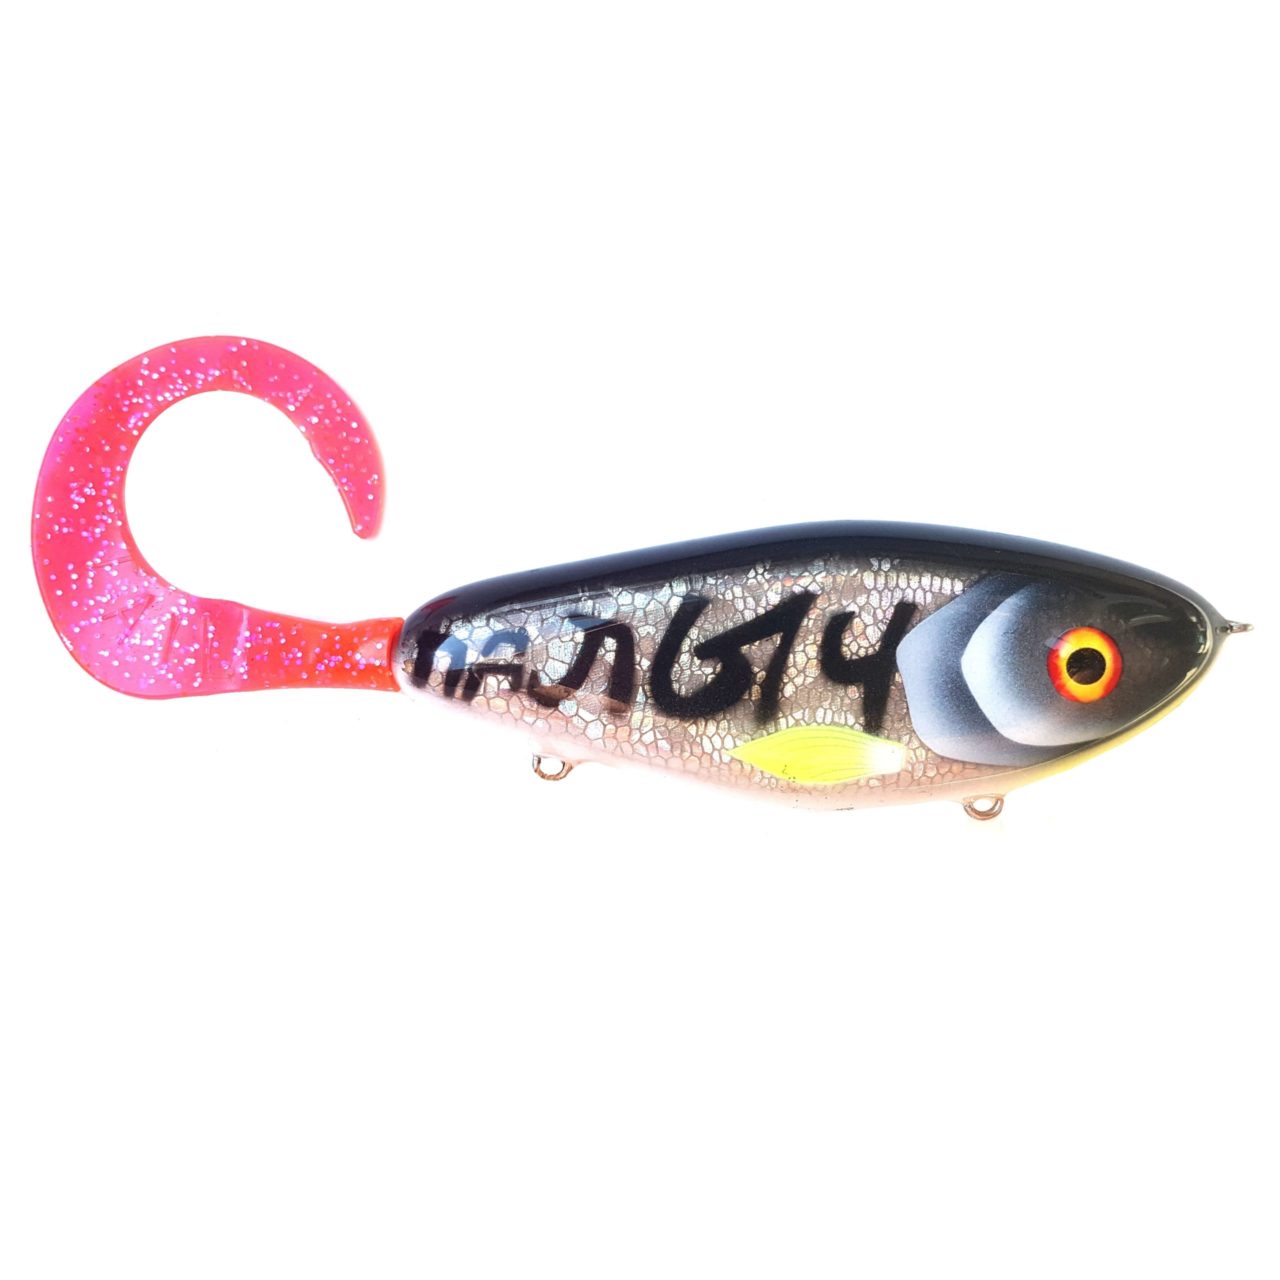 Palych Custom Renegade Petty Perch Tail Silver Foil Palych